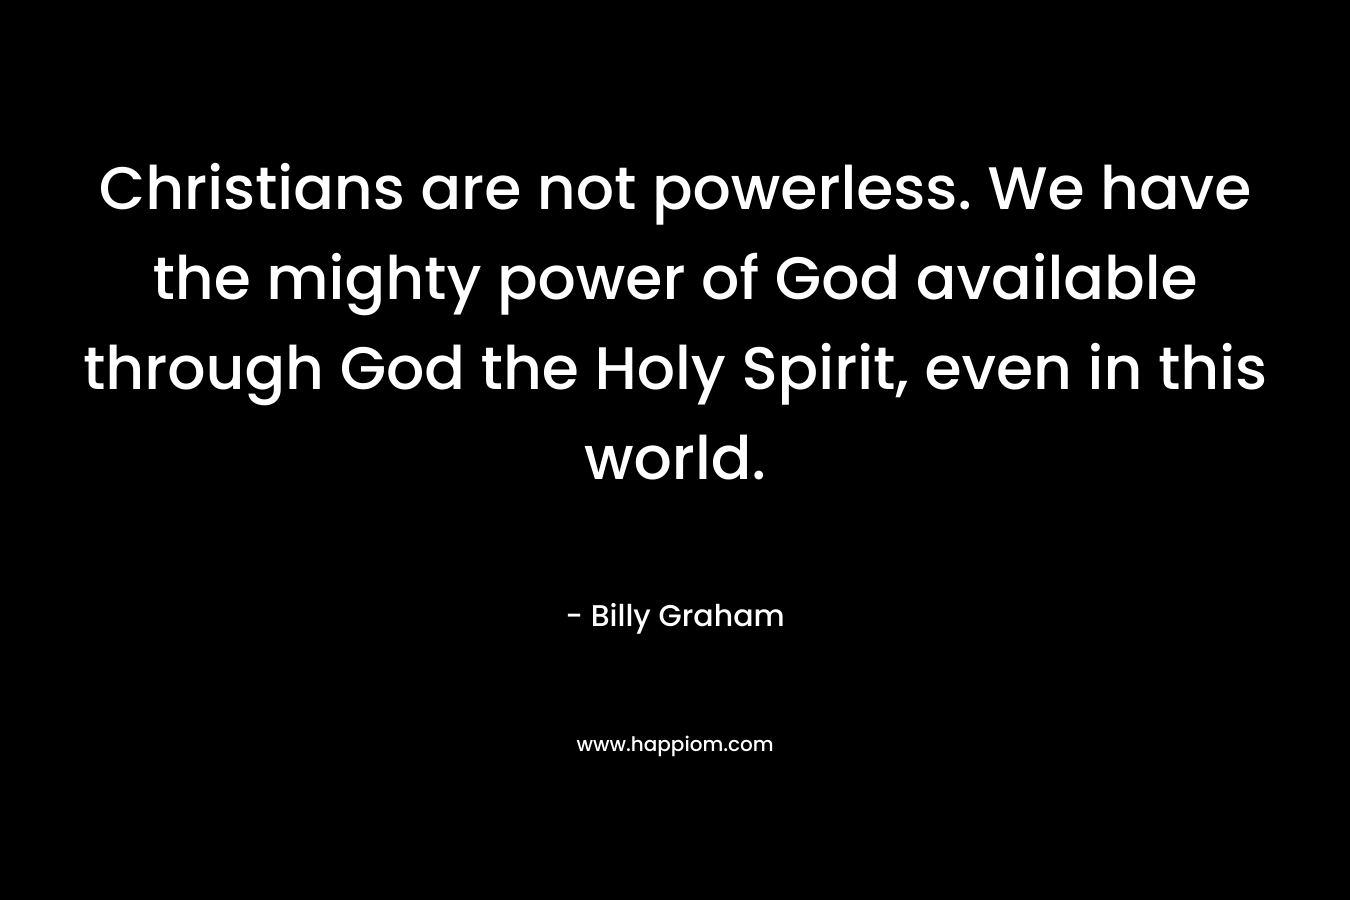 Christians are not powerless. We have the mighty power of God available through God the Holy Spirit, even in this world.